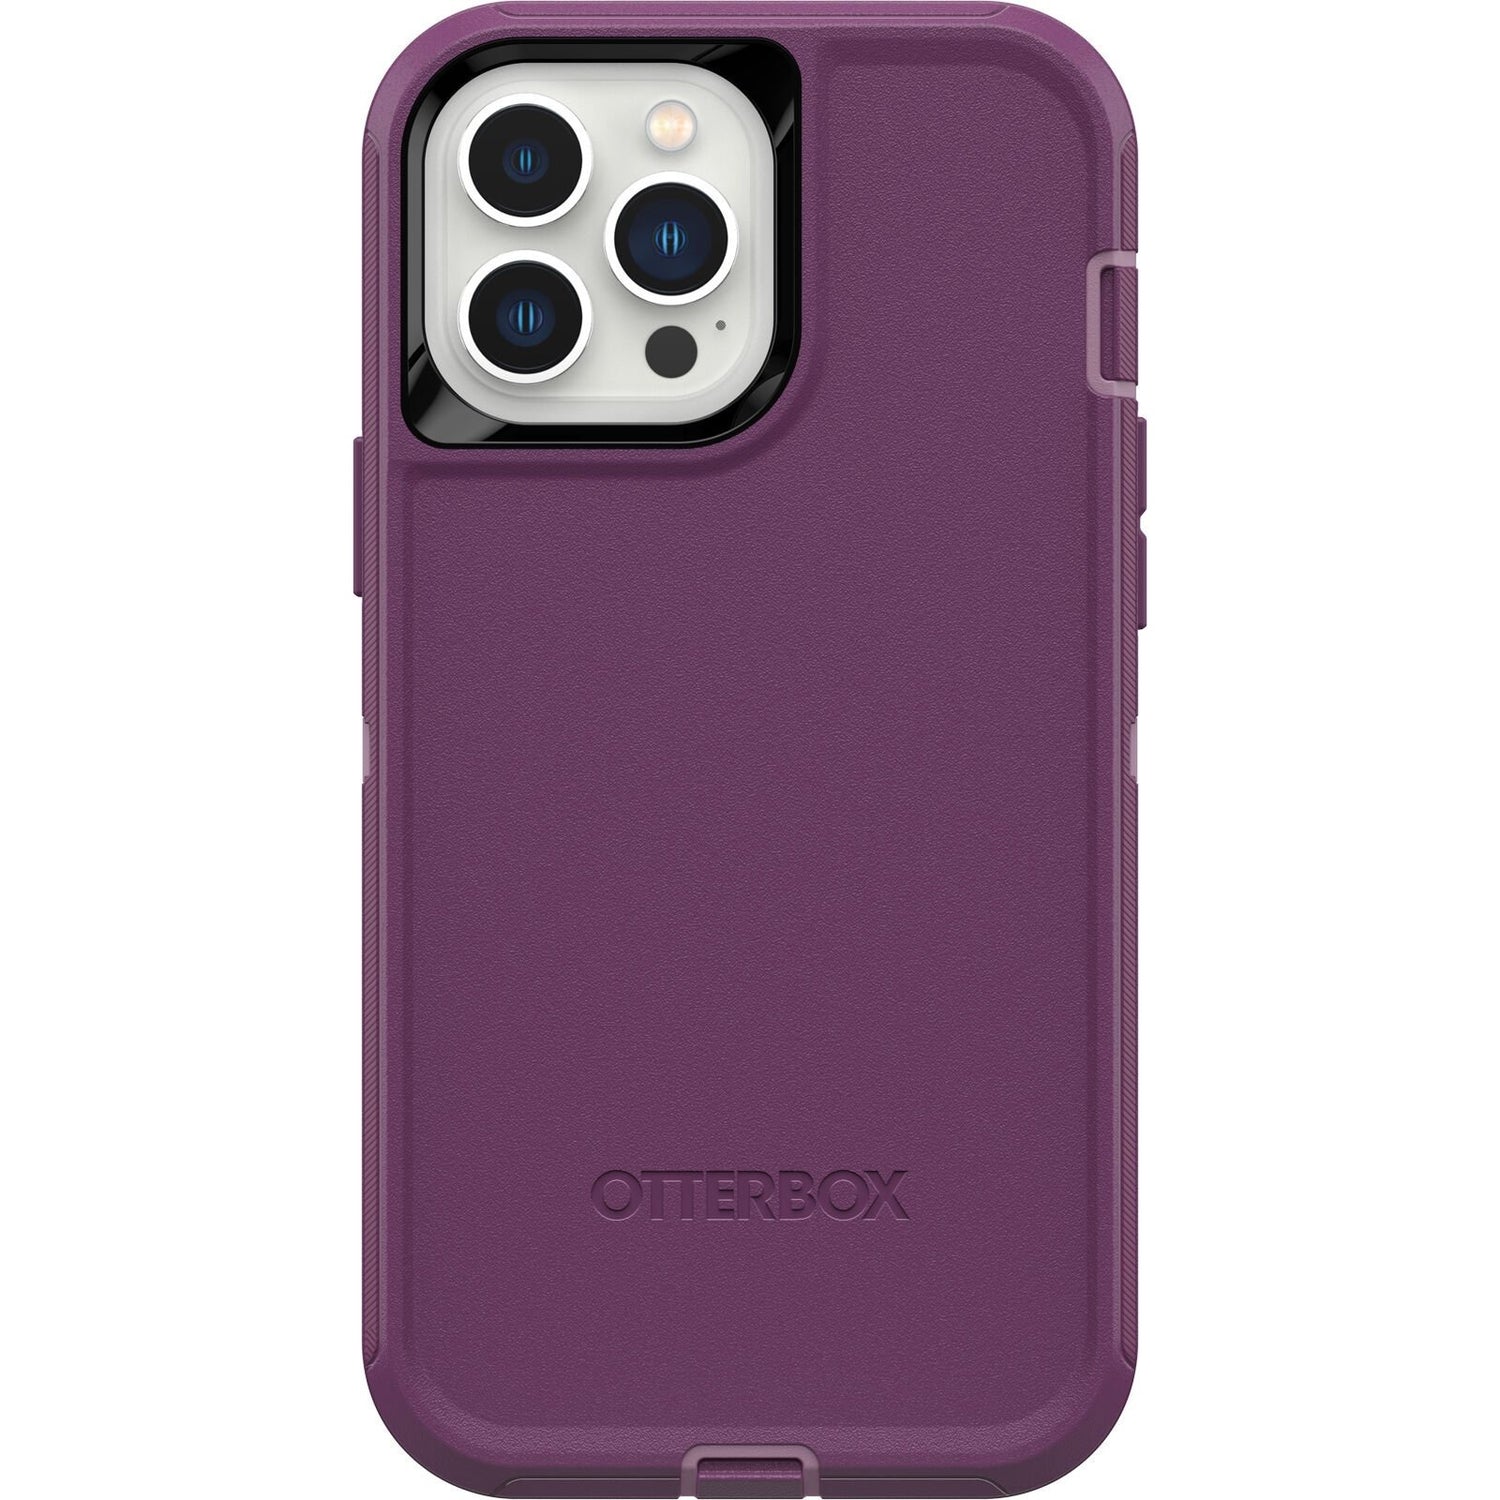 OtterBox DEFENDER SERIES for iPhone 13 Pro Max/12 Pro Max - Happy Purple (New)